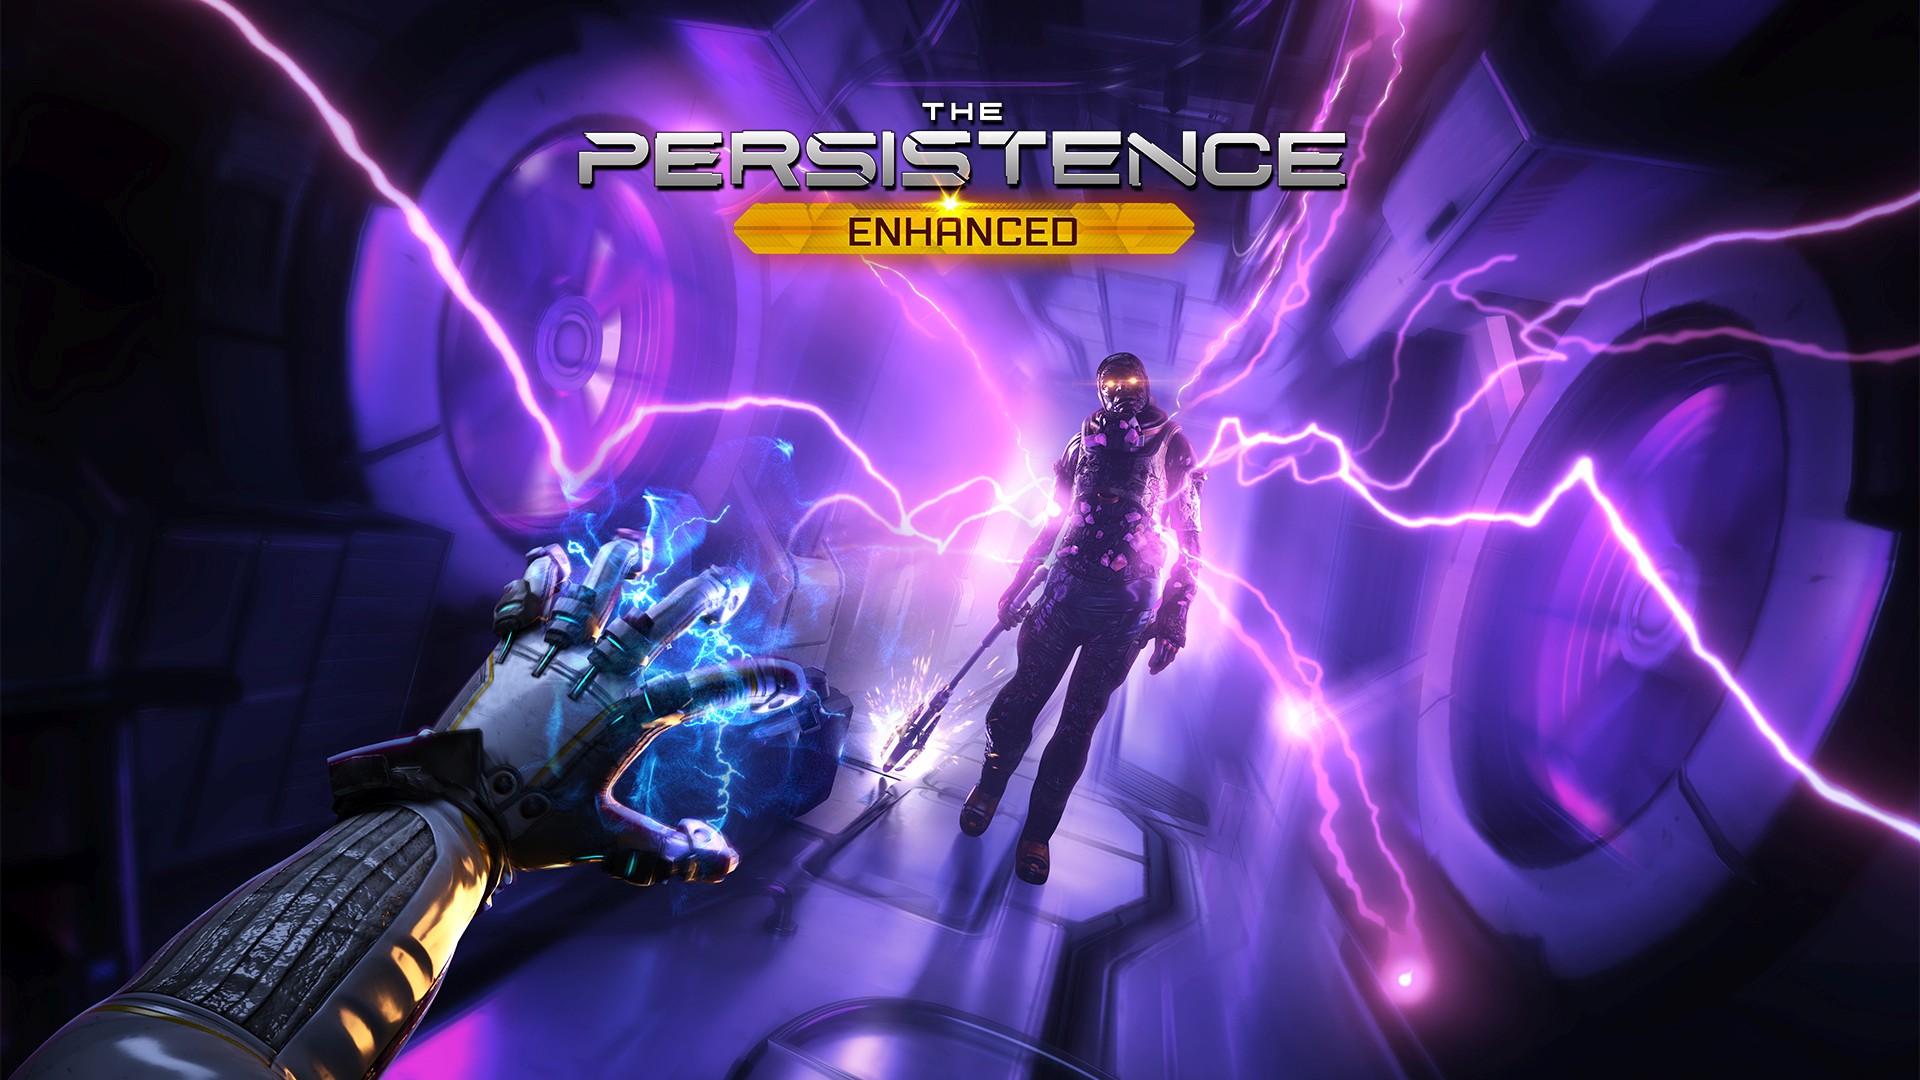 Video For The Persistence Enhanced Available Now for Xbox Series X|S